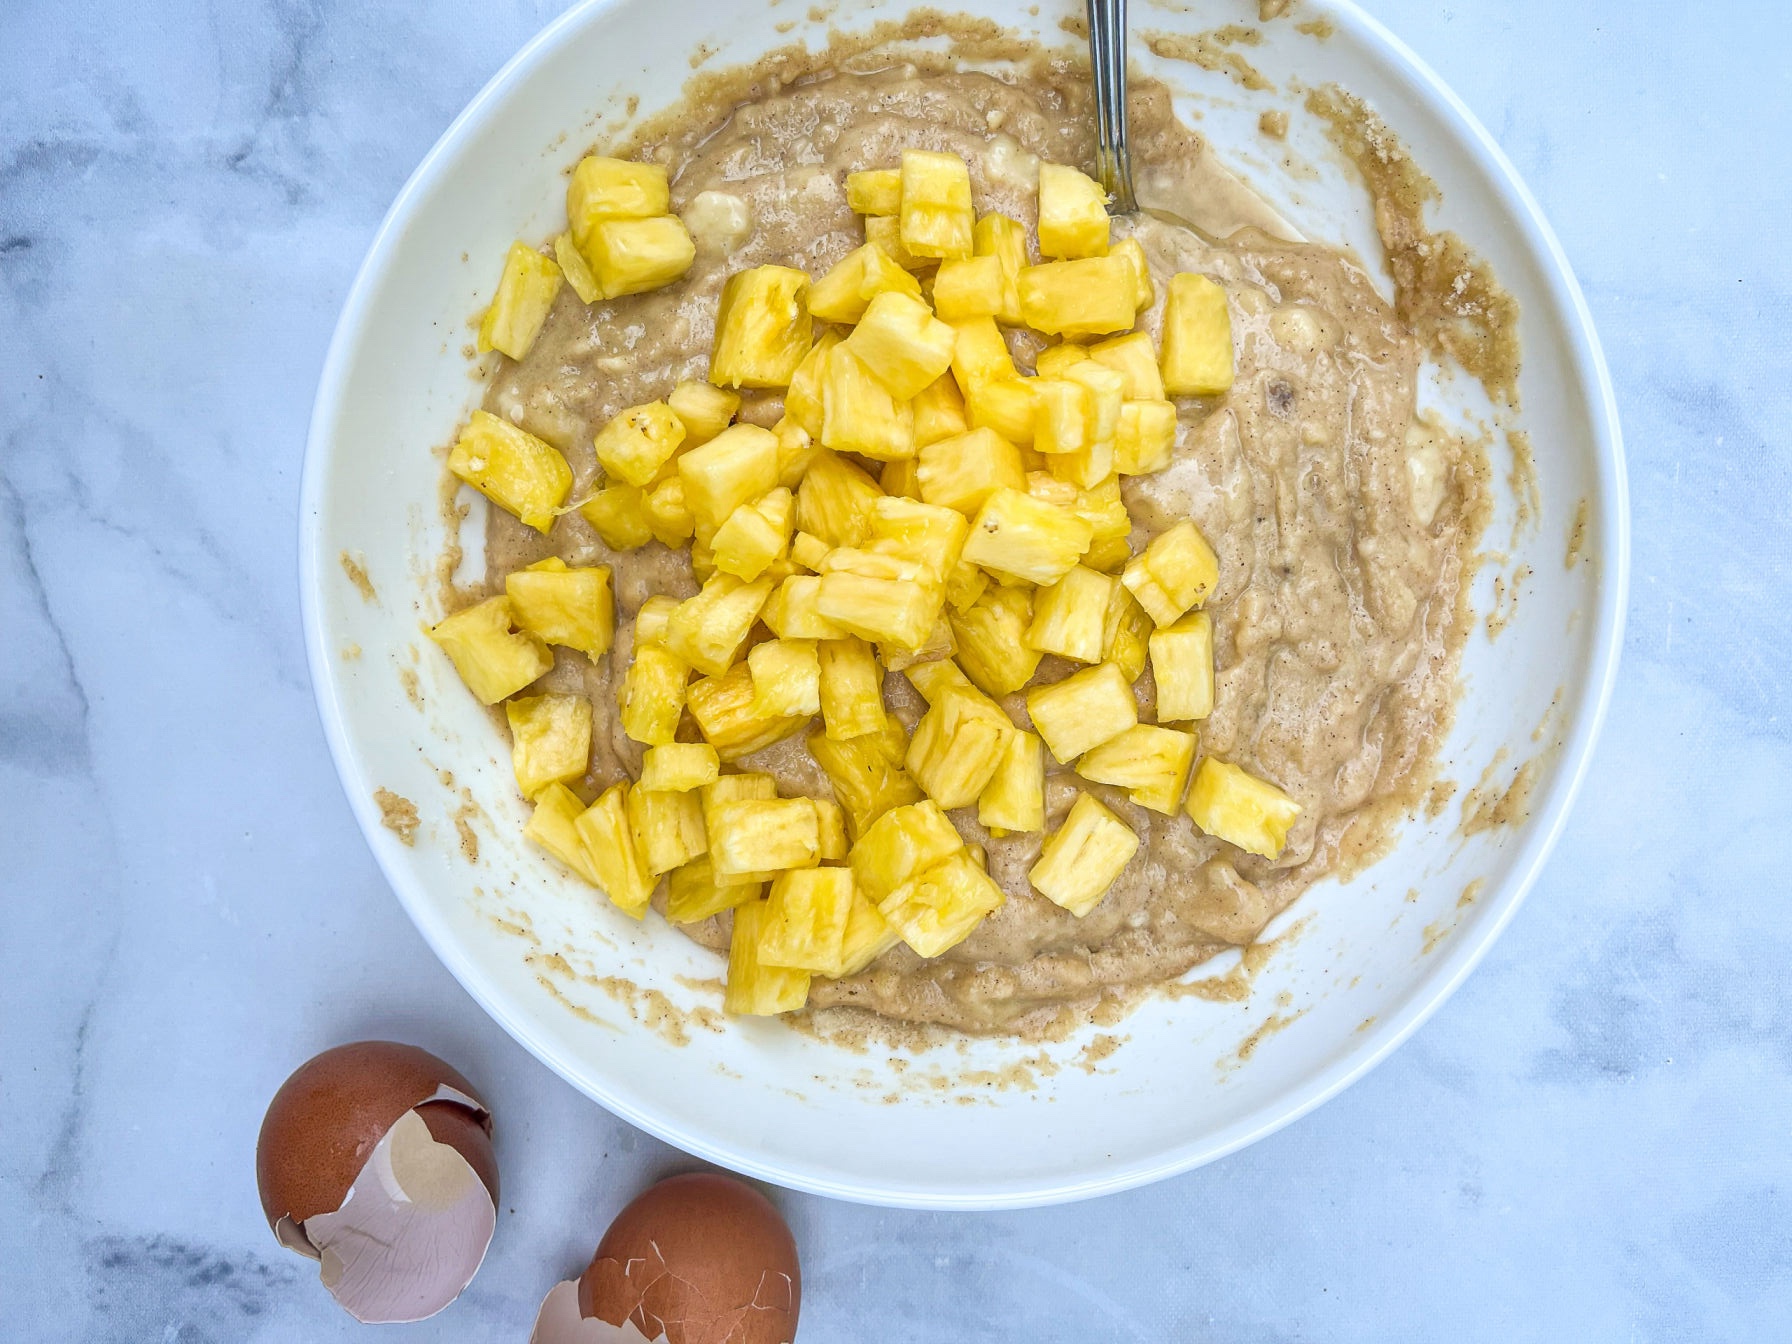 mixing pineapple coconut muffins batter in a bowl